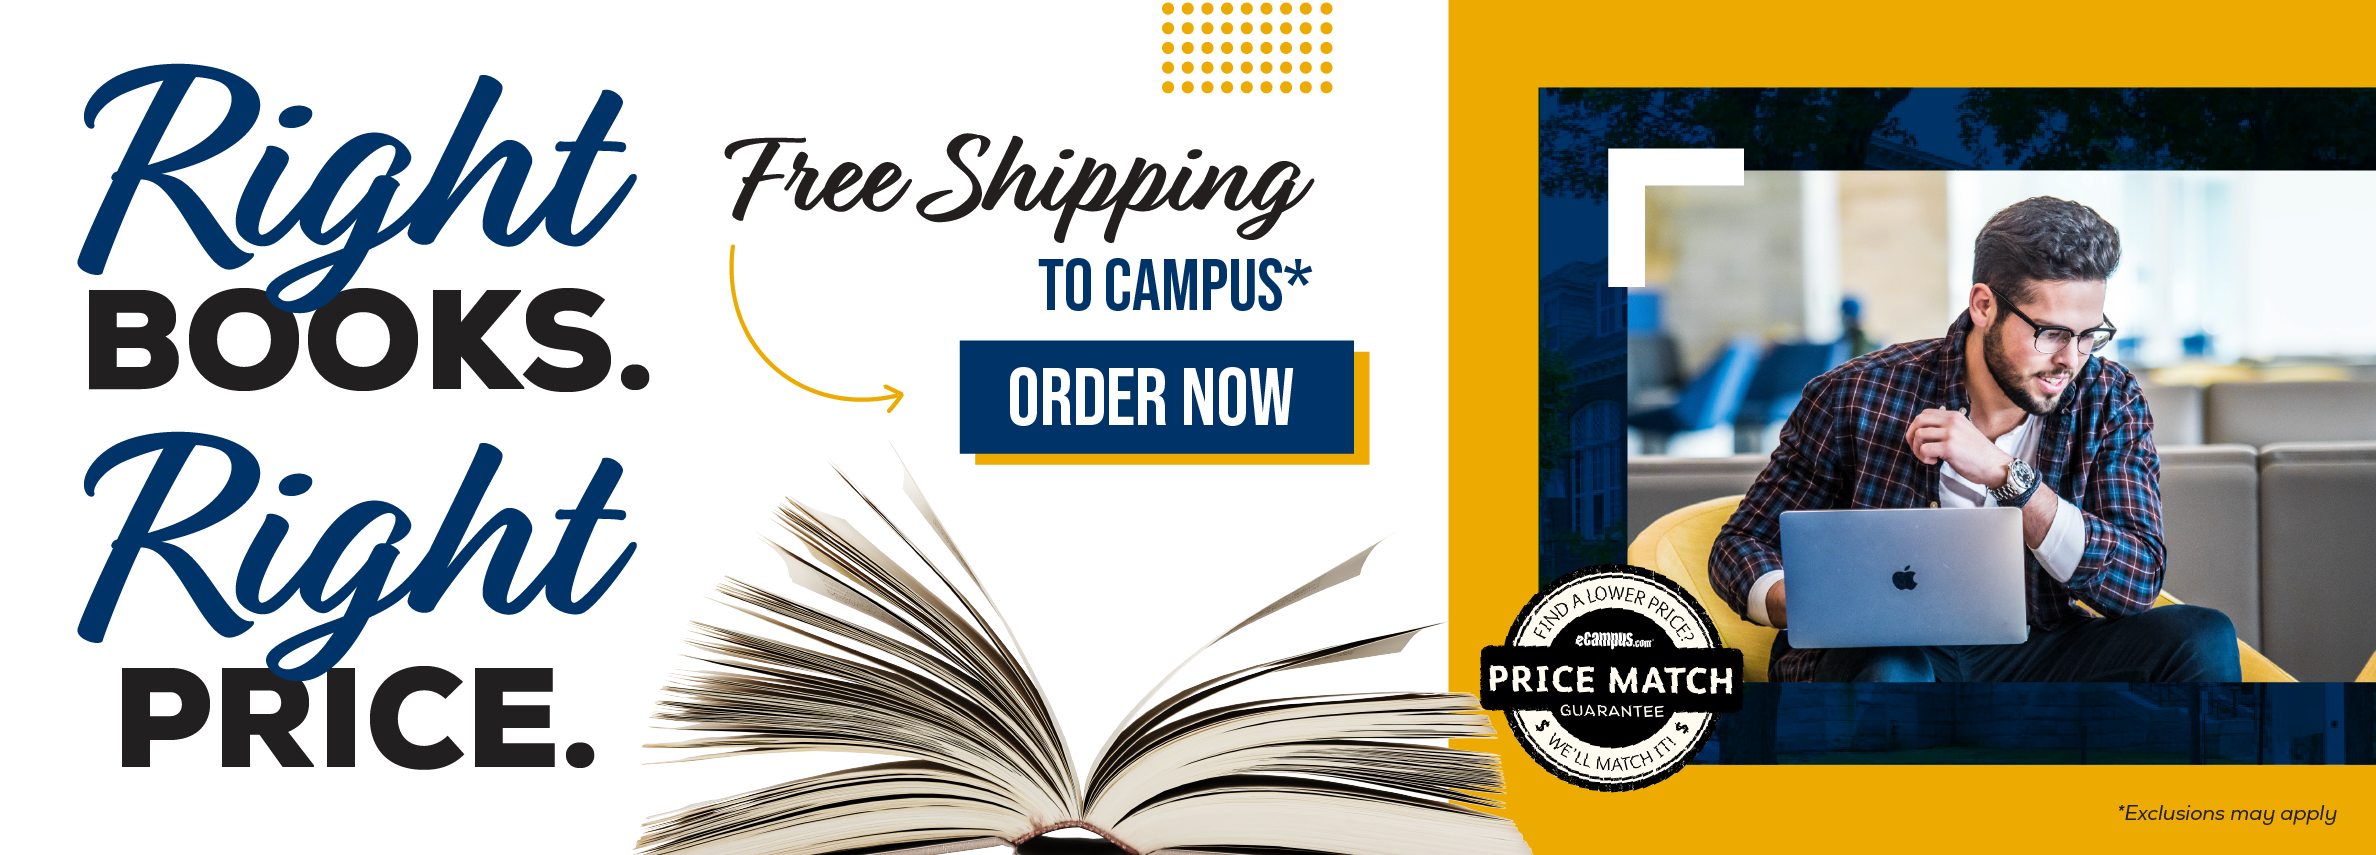 Right books. Right price. Free shipping to campus* Order now. Price Match Guarantee. *Exclusions may apply.